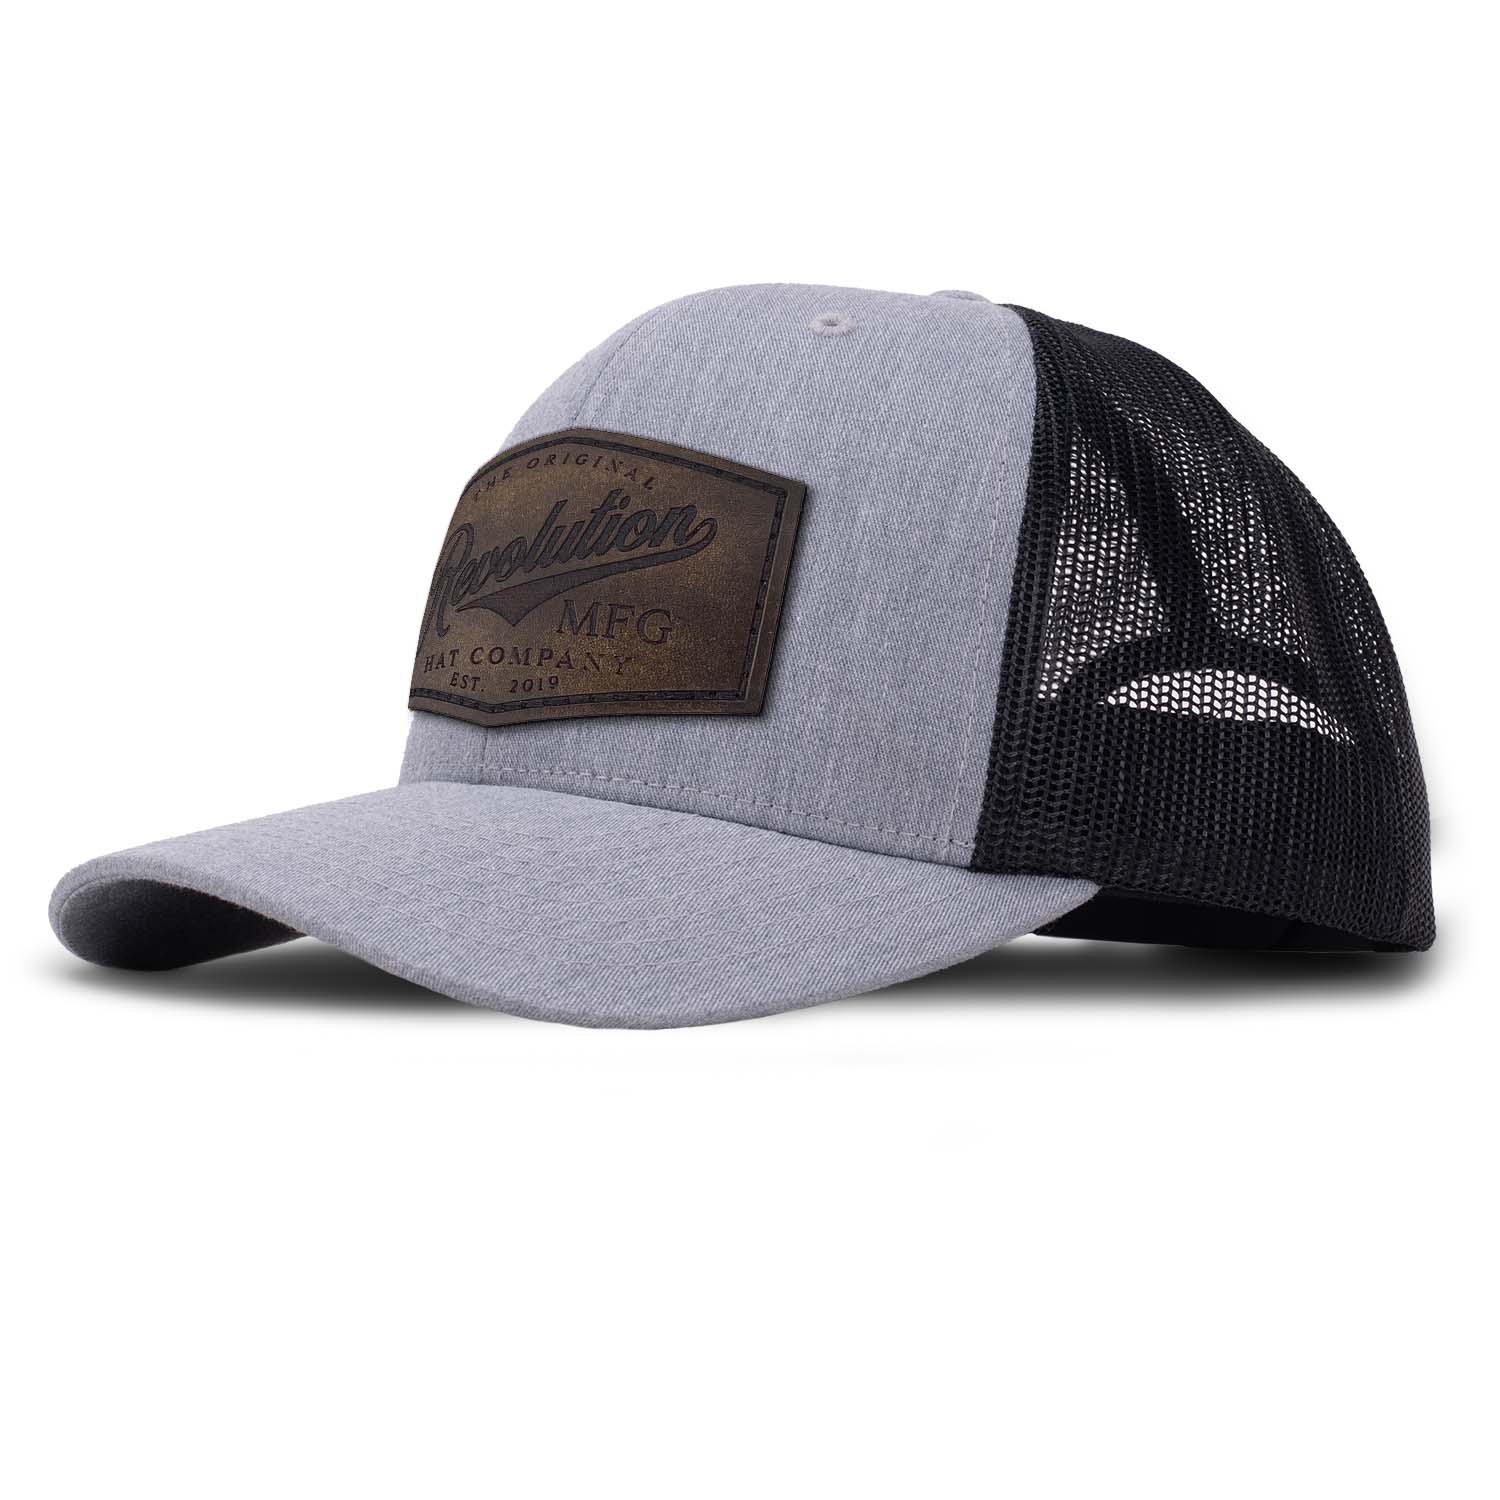 Revolution Mfg Hat Co full grain leather patch on a classic heather gray trucker hat with black mesh